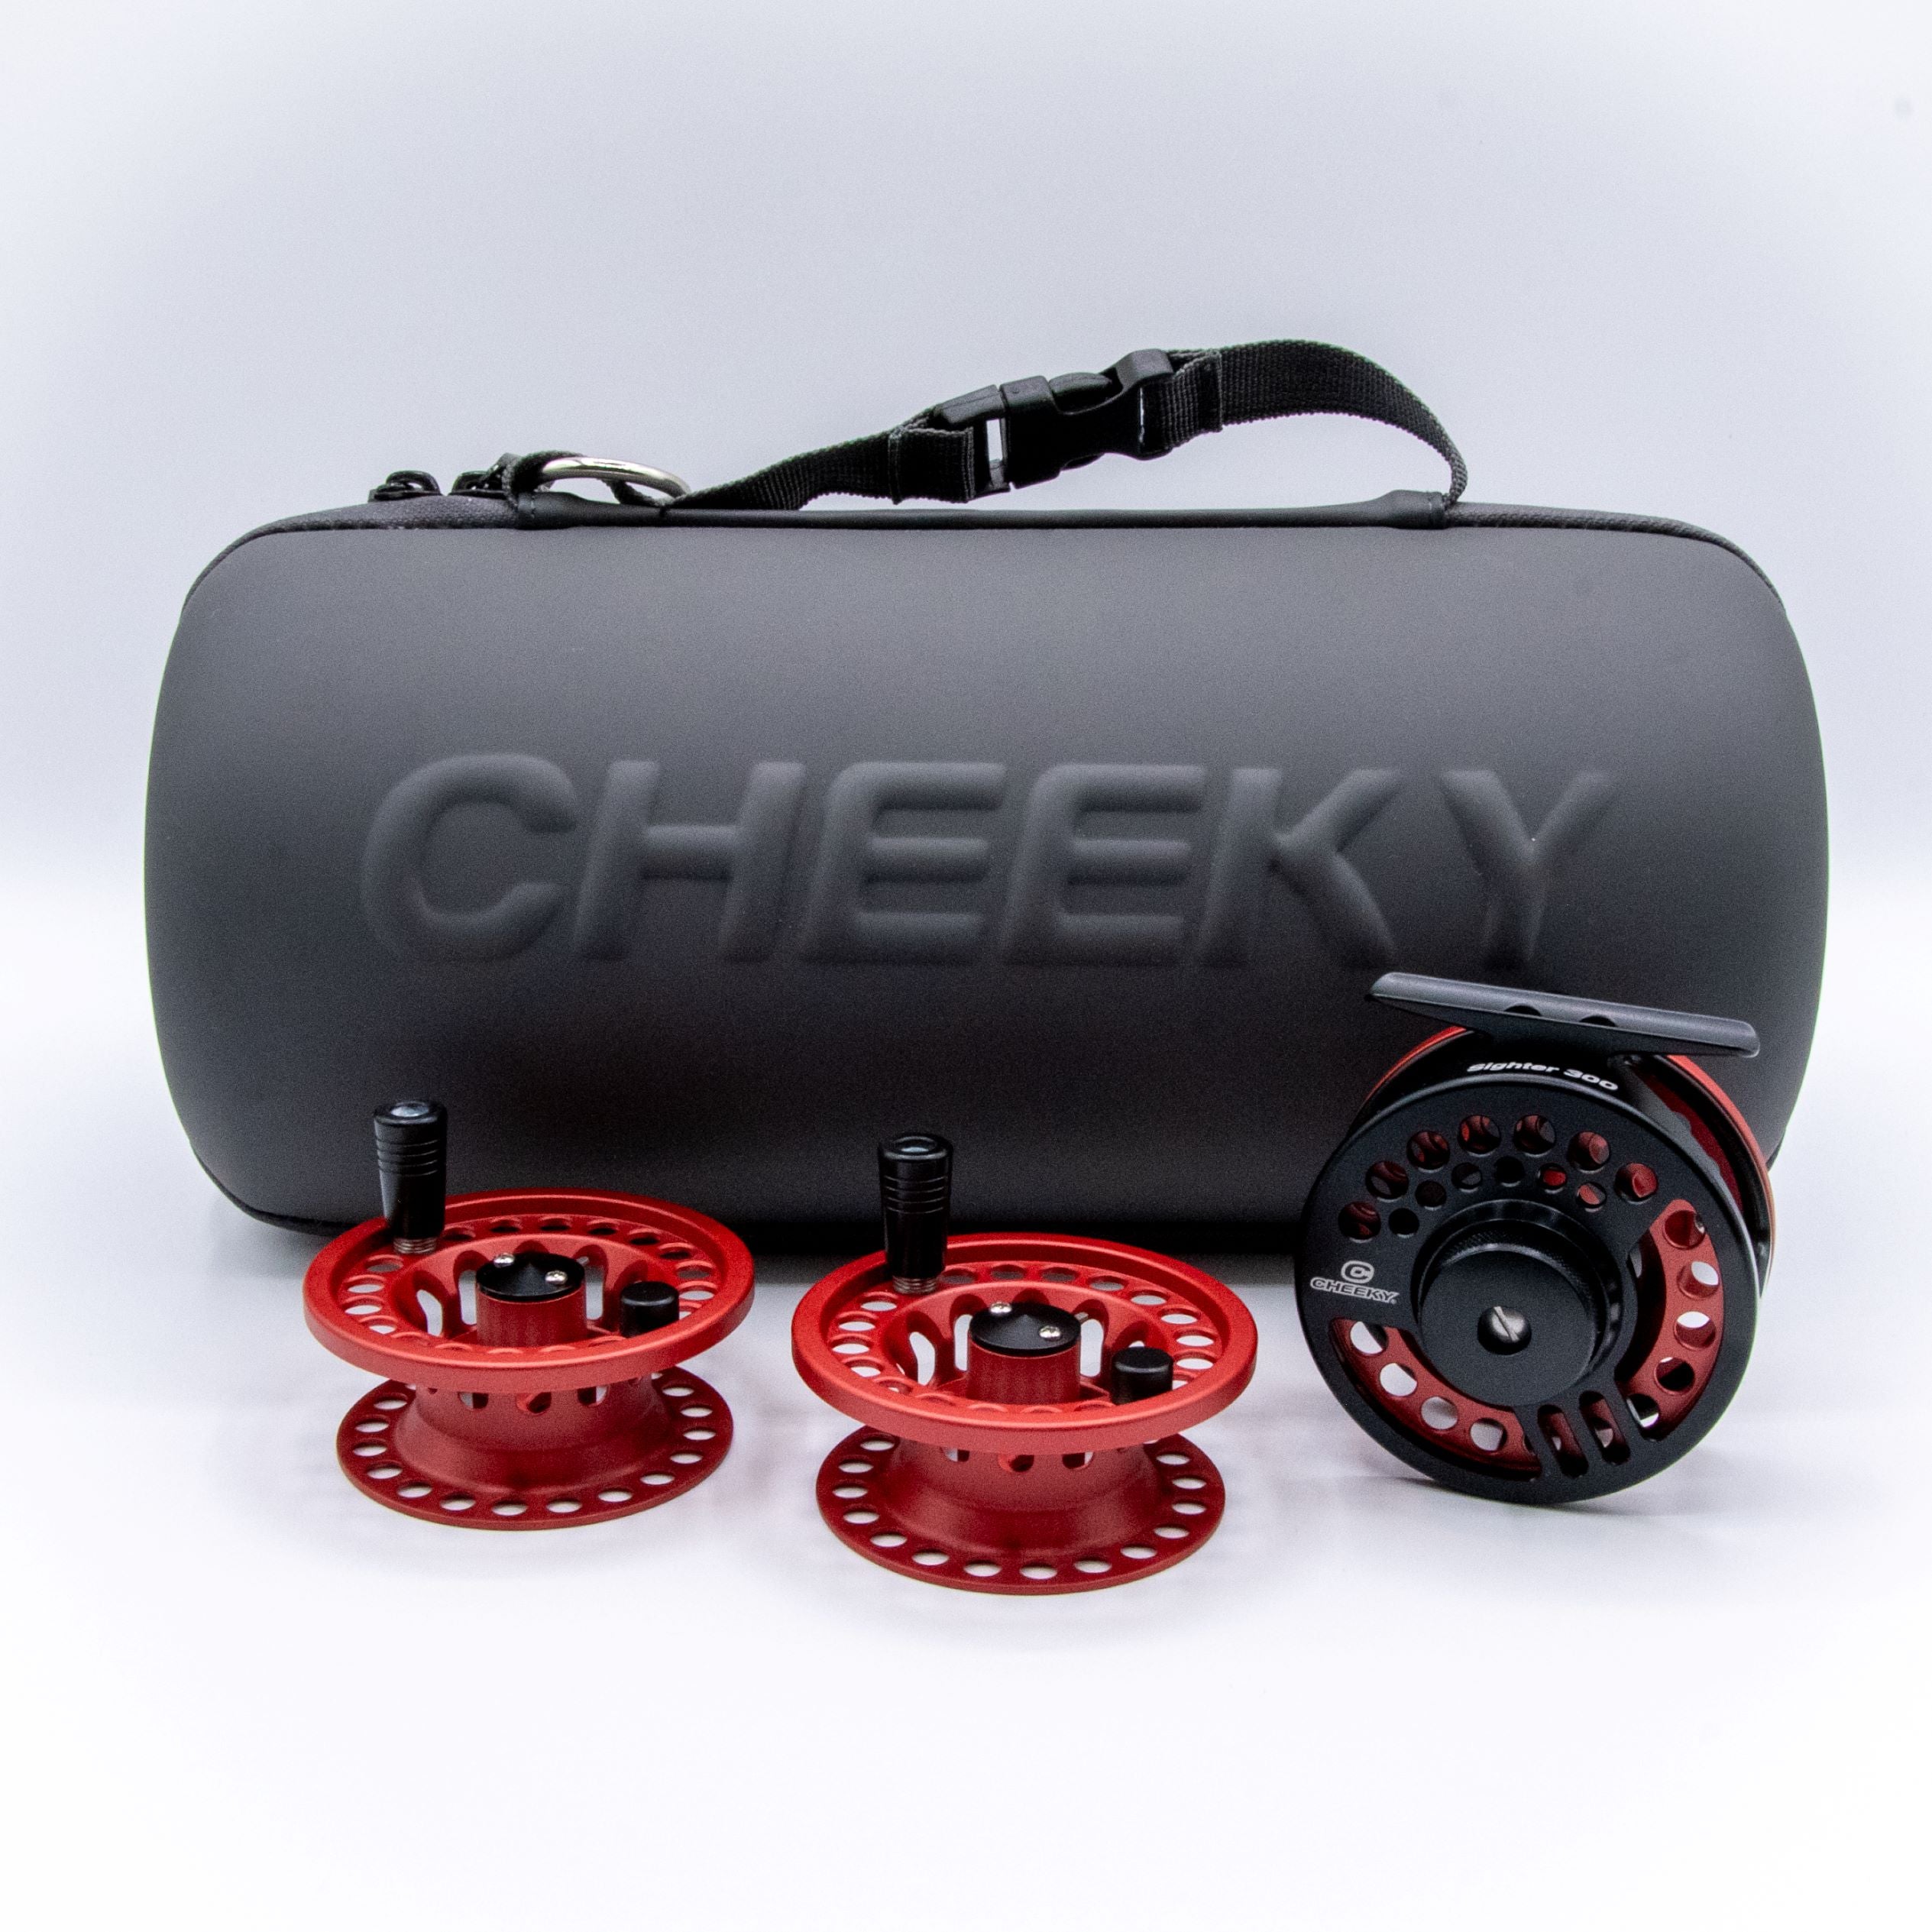 Cheeky Fly Reels: FREE SHIPPING